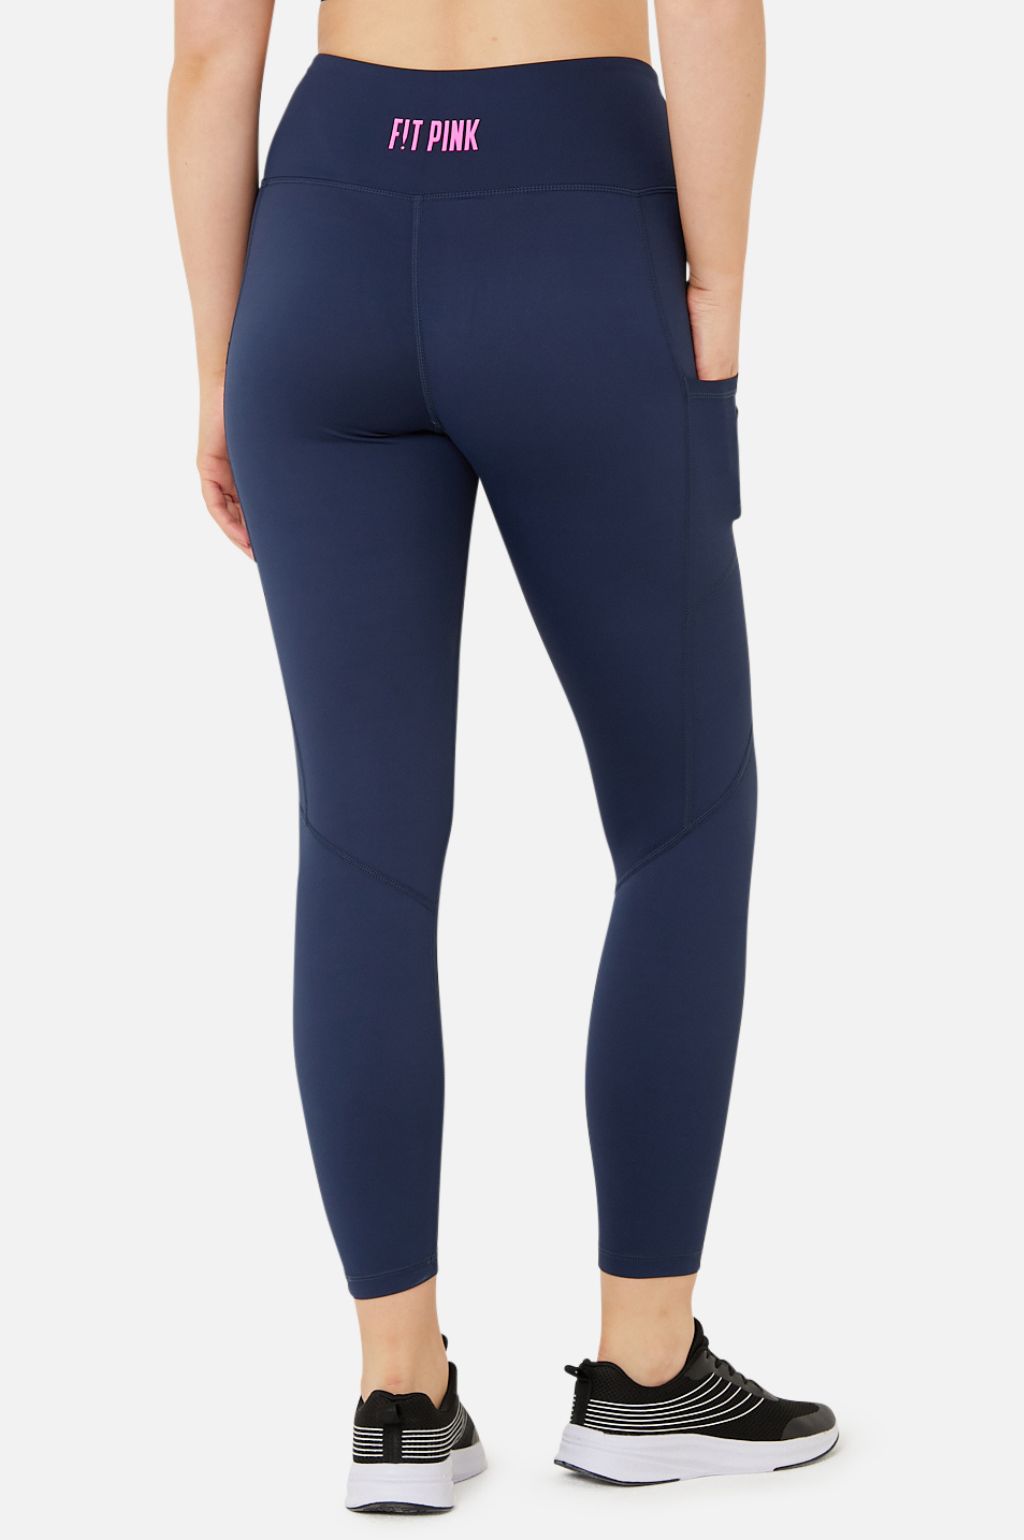 Elevate Full Leggings by Muscle Republic Online, THE ICONIC